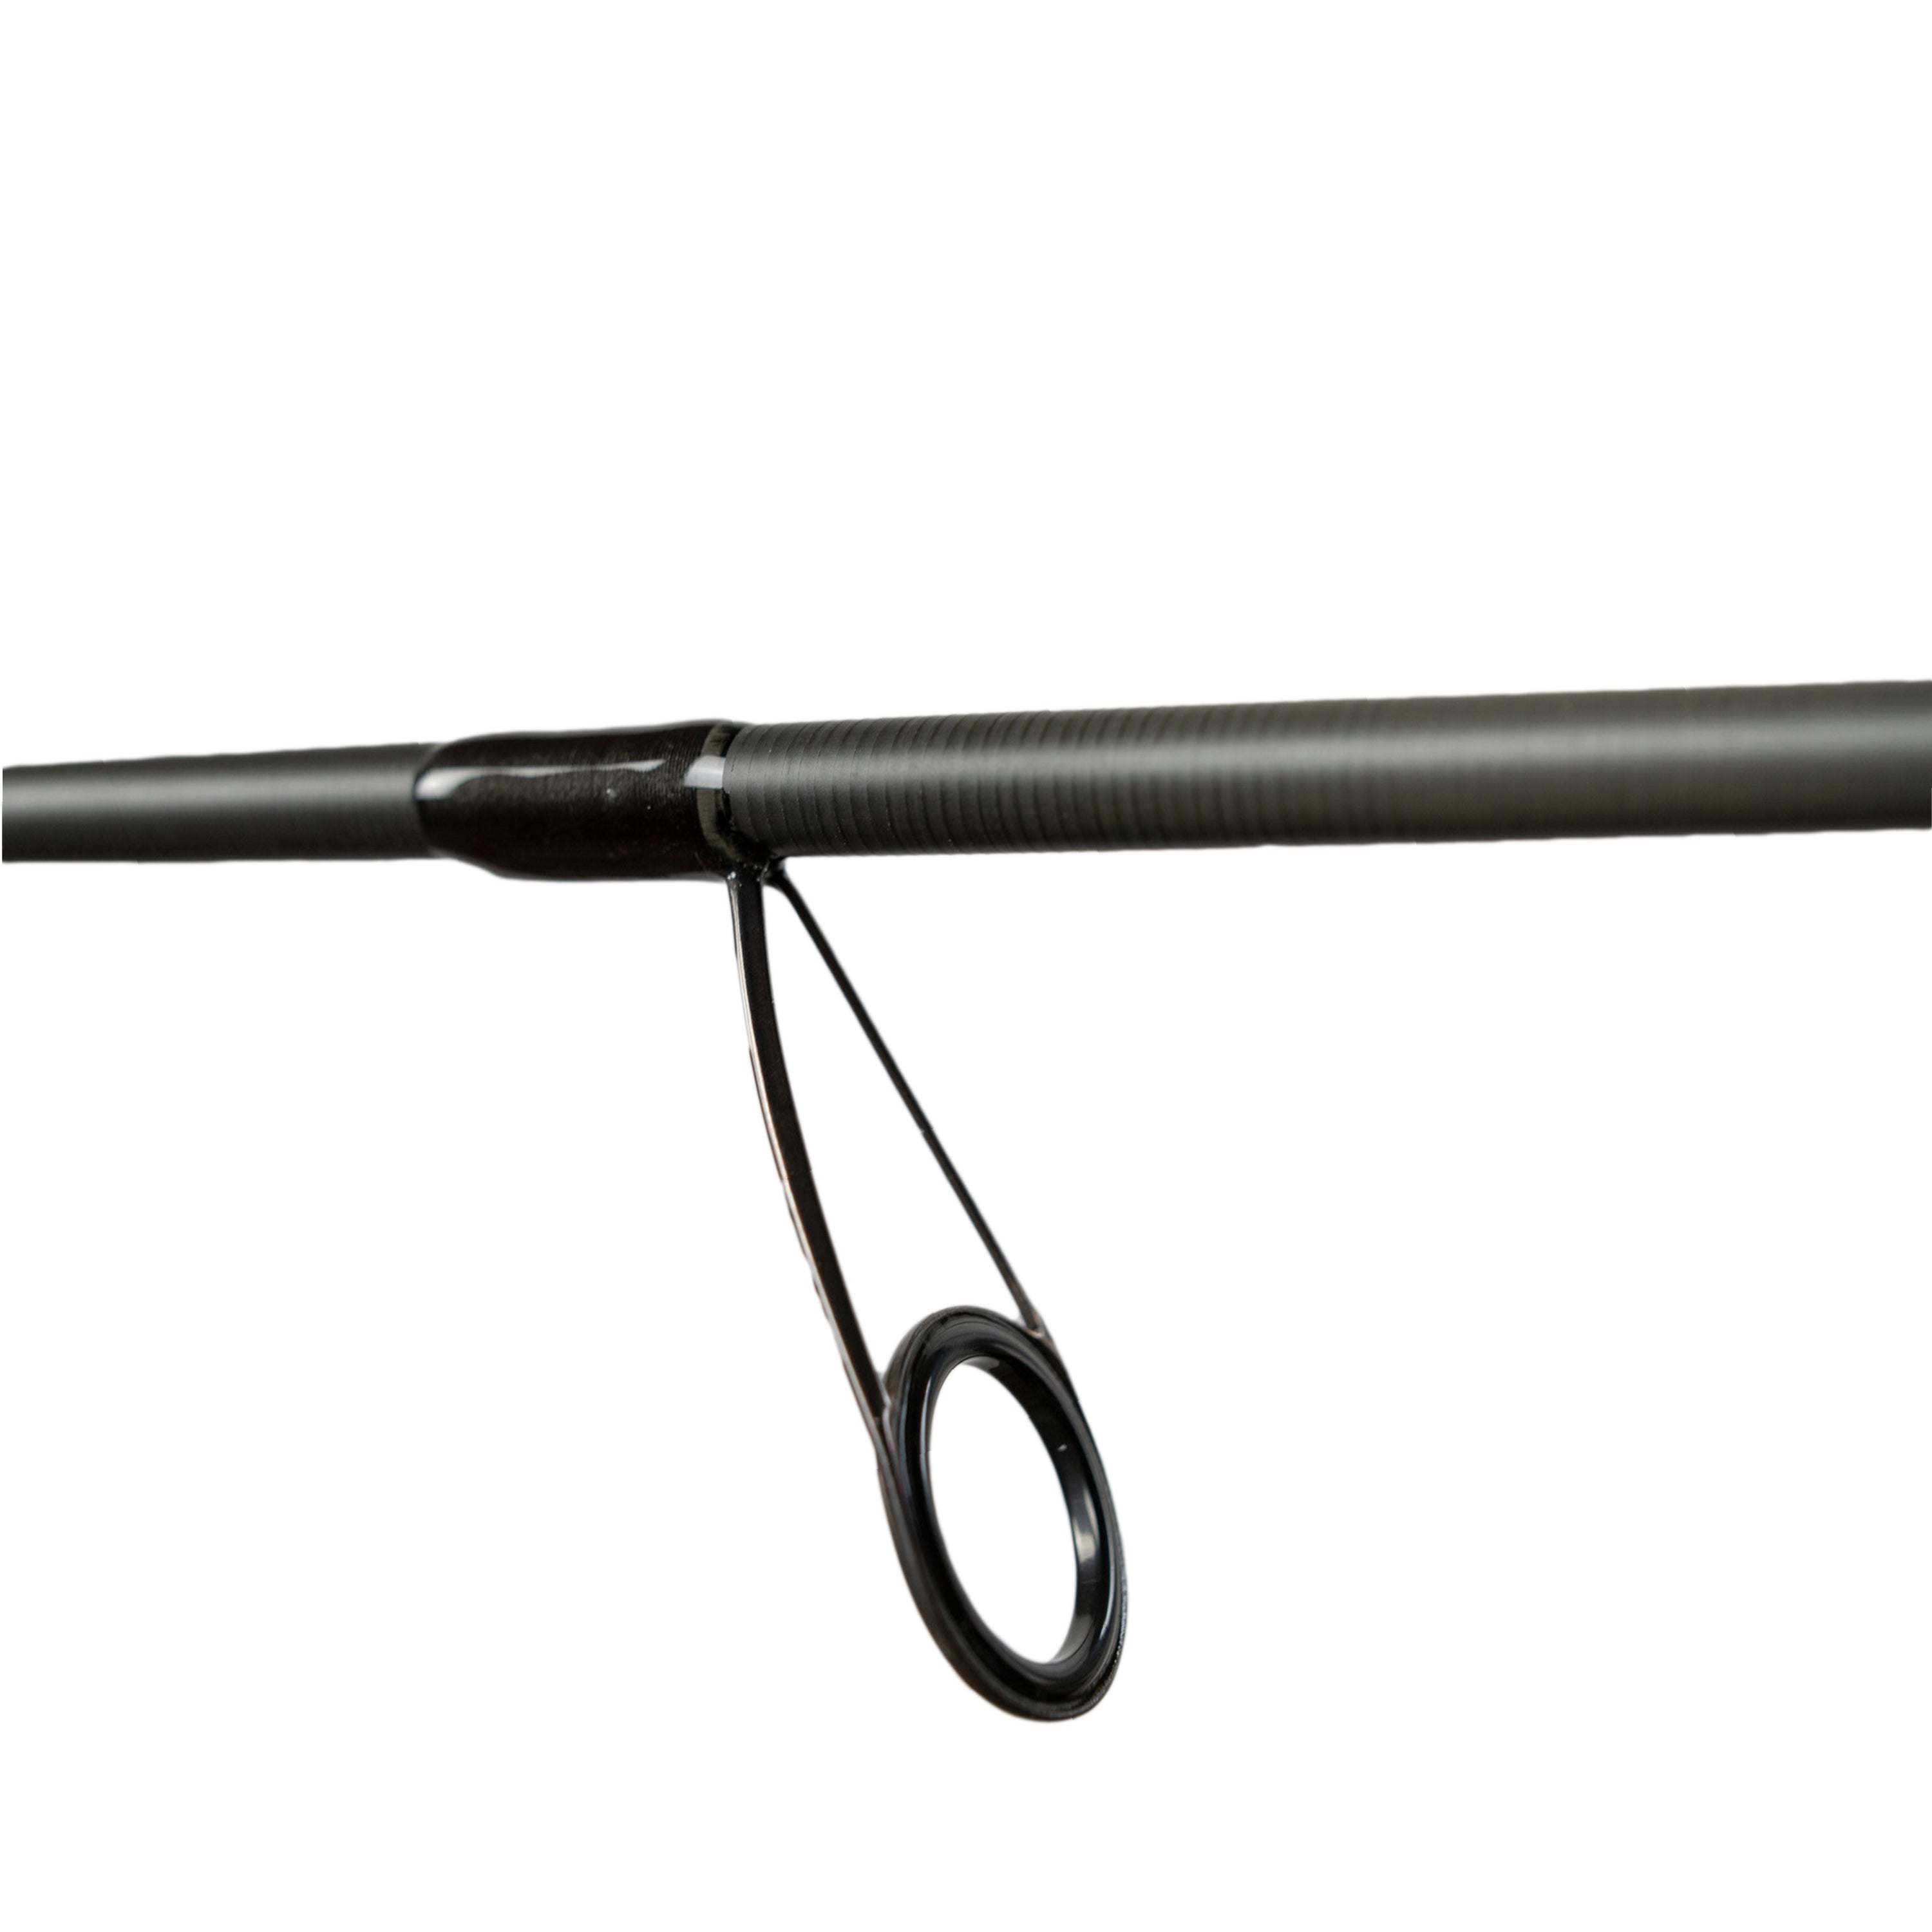 Who Makes the Best Drop Shot Rod?